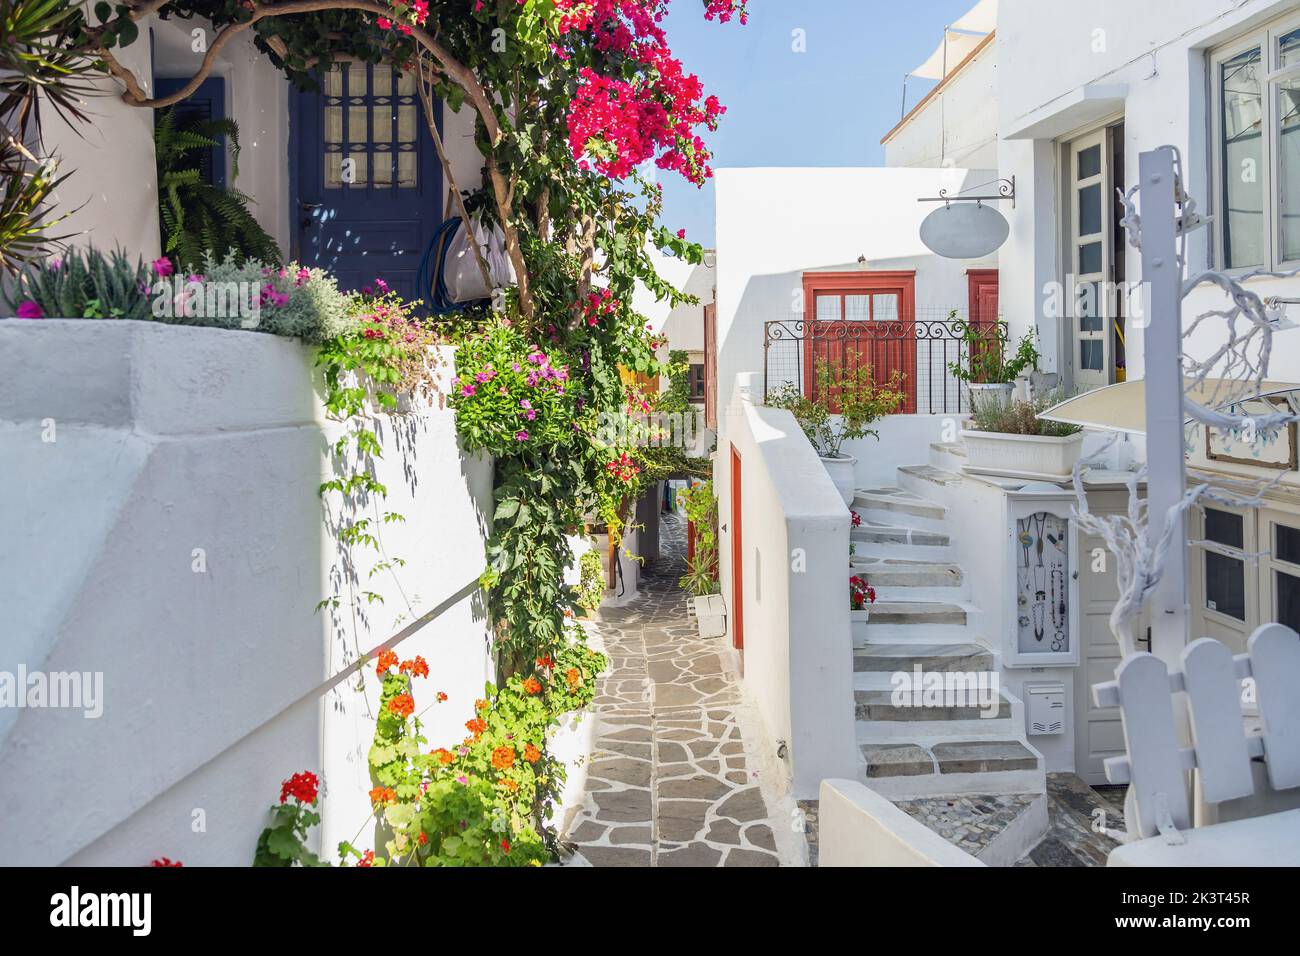 Naxos island, Greece. Traditional Cyclades architecture whitewashed buildings, plants and flowers, souvenir shop, paved alley. Summer holiday destinat Stock Photo